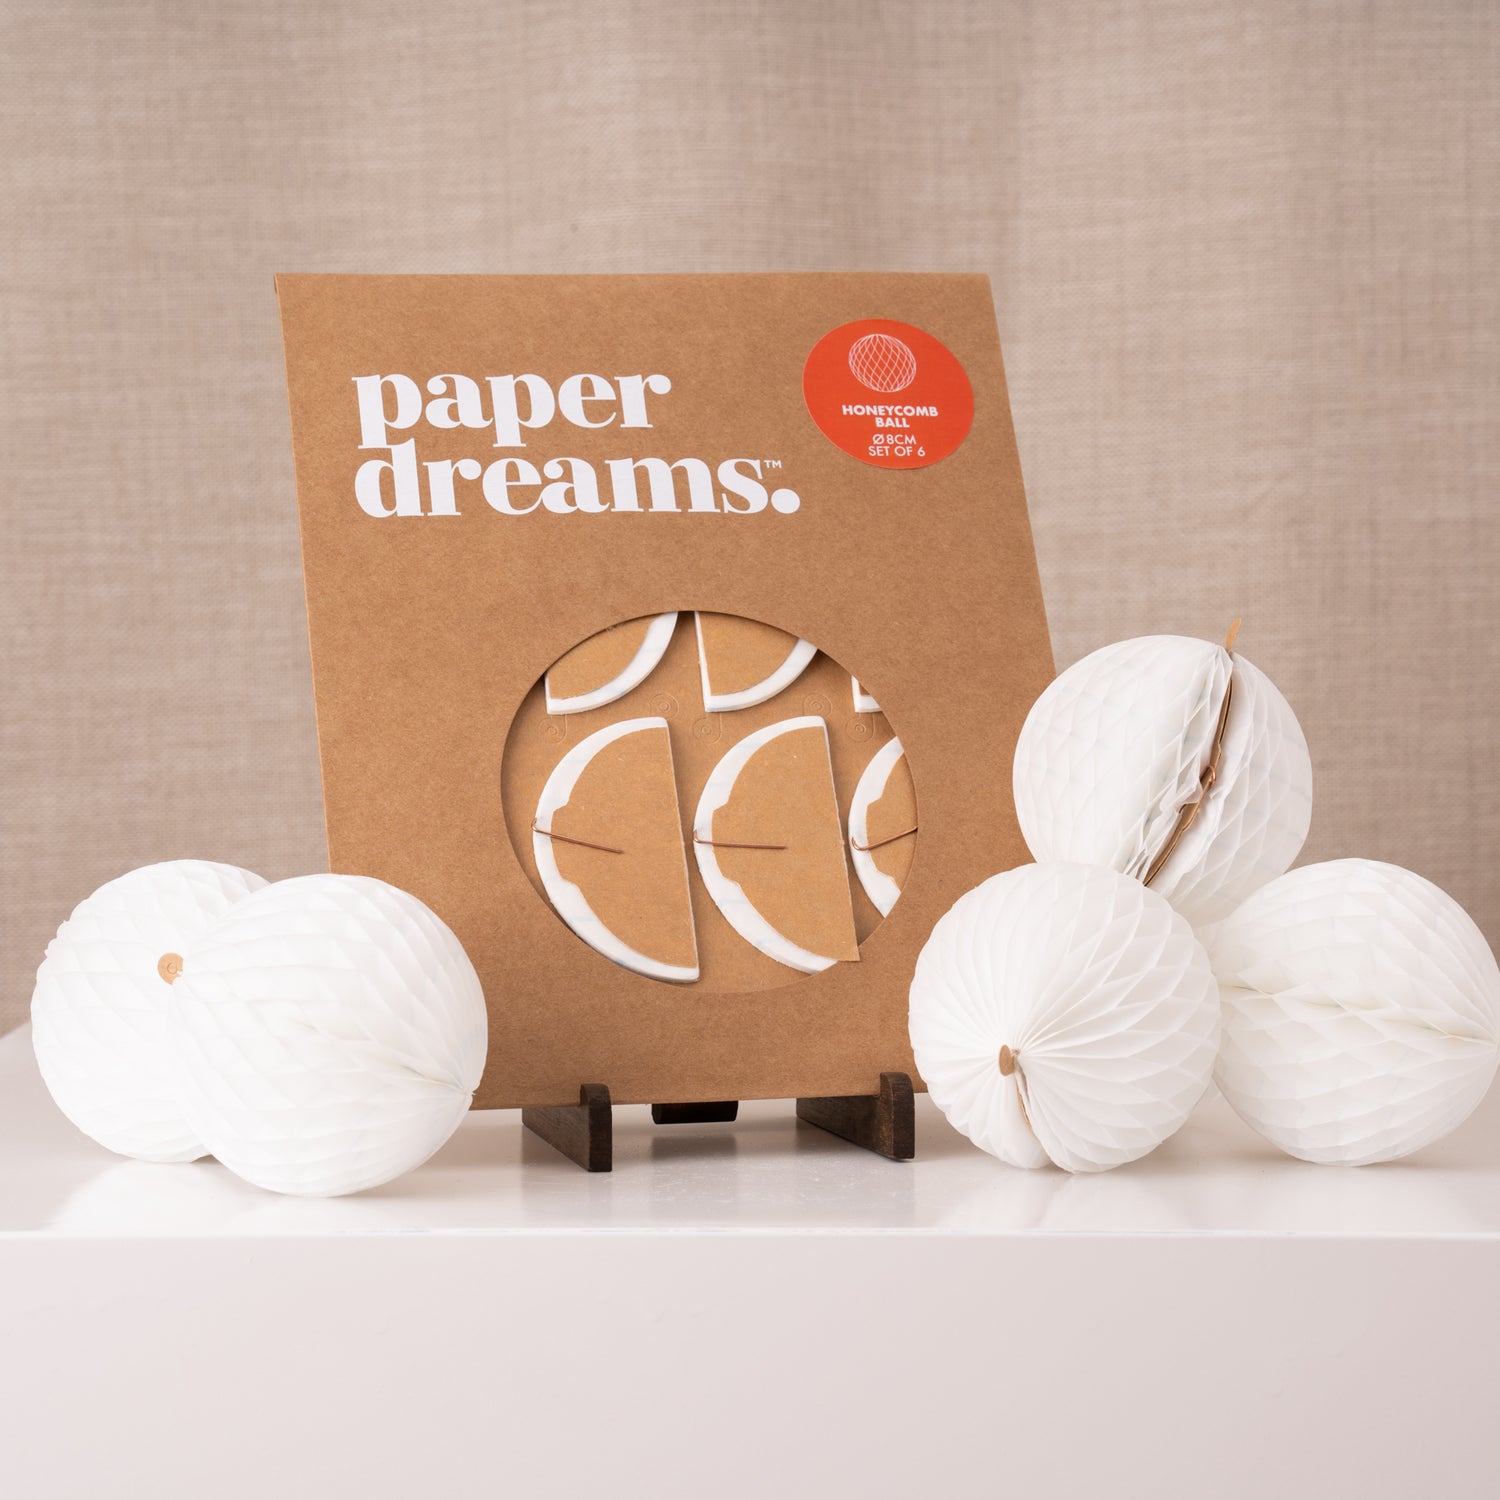 Paper Dreams Honeycomb Ball set of 6 Plastic Free Decorations White